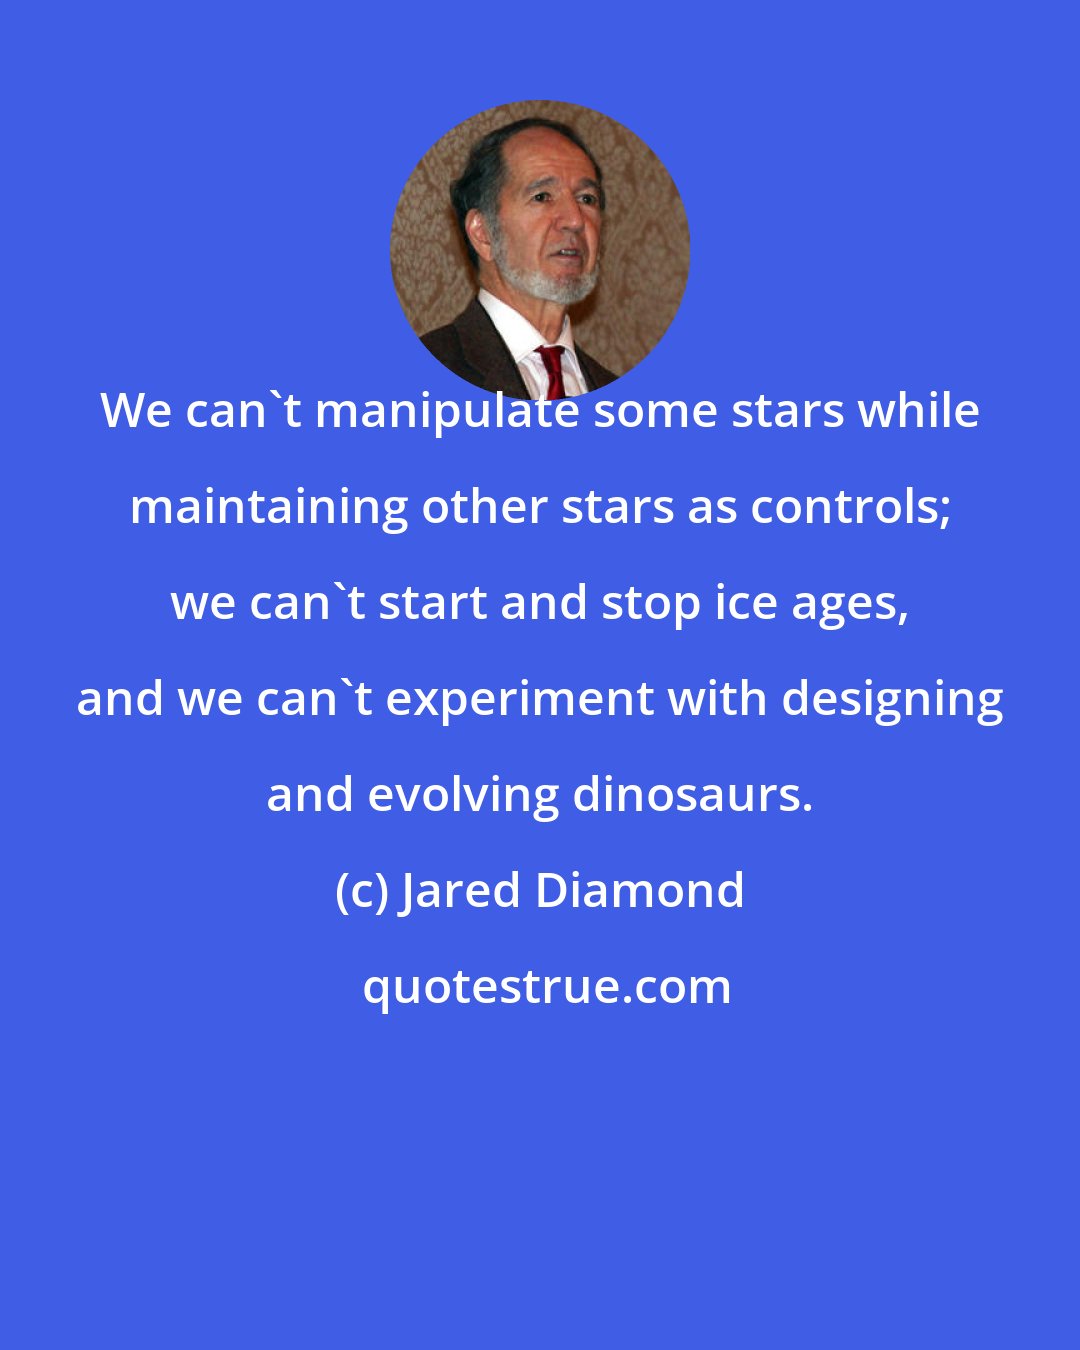 Jared Diamond: We can't manipulate some stars while maintaining other stars as controls; we can't start and stop ice ages, and we can't experiment with designing and evolving dinosaurs.